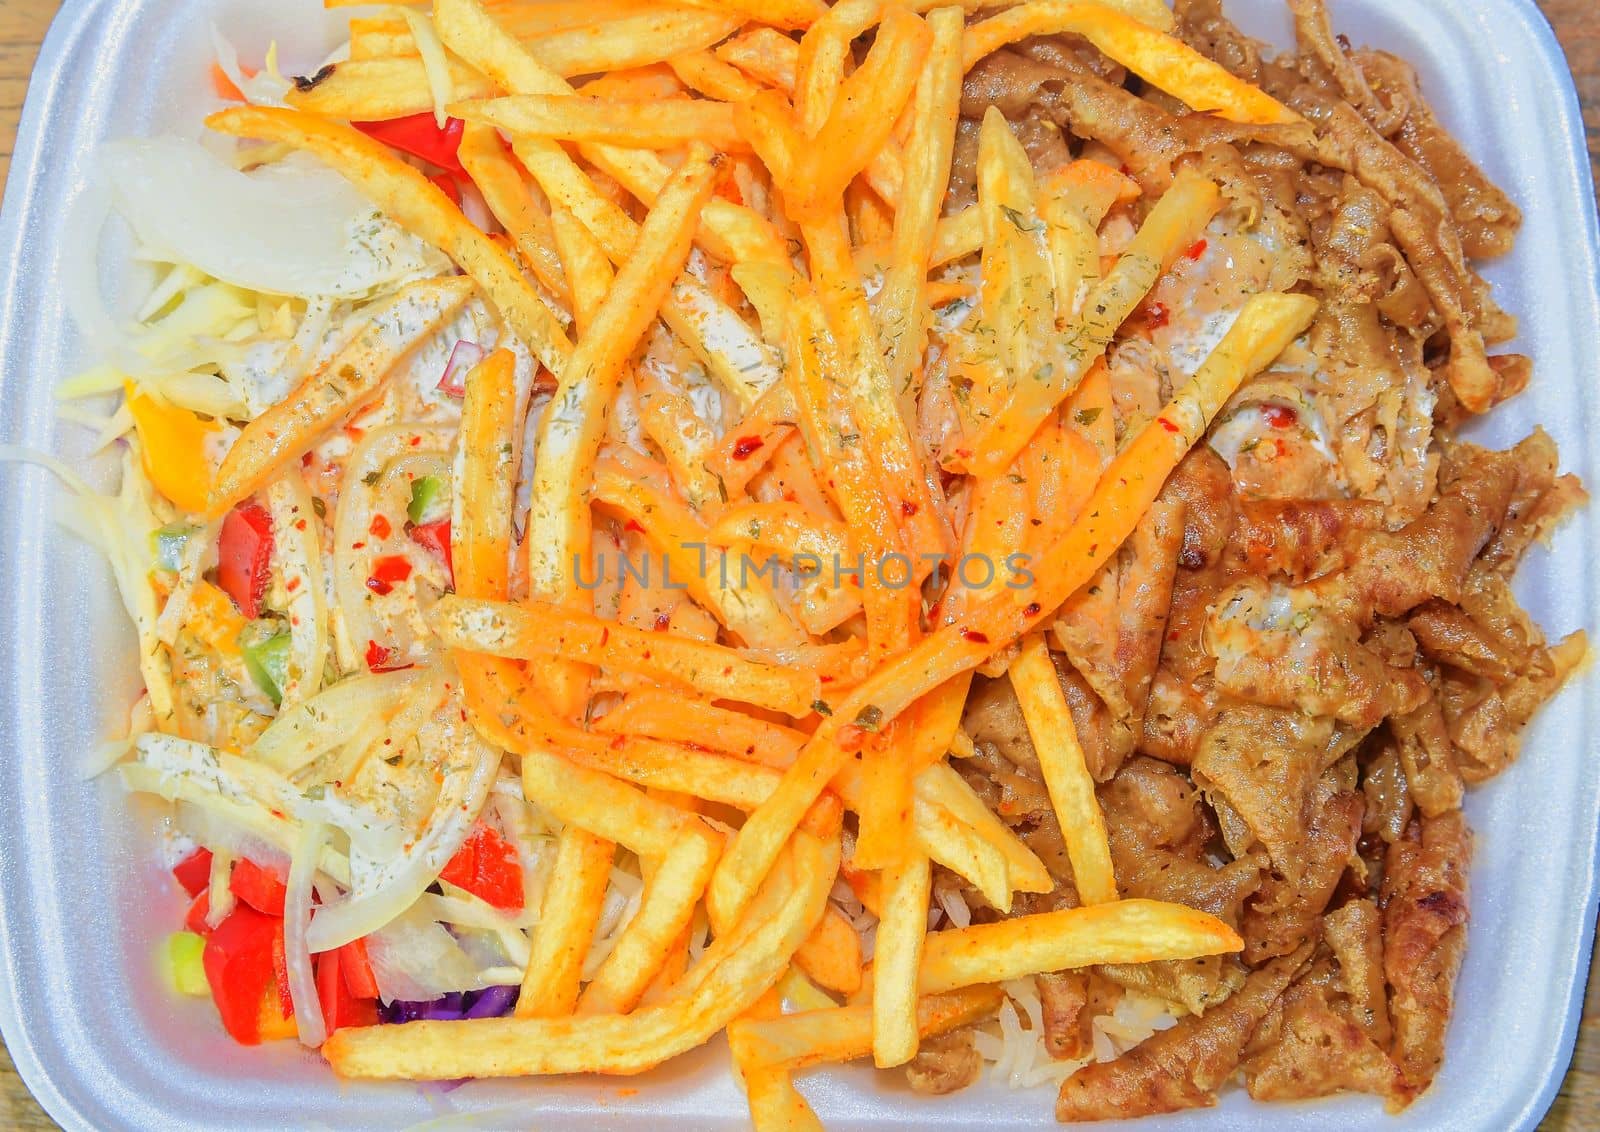 Fast food: kebabs, fries and fresh salad in the tray on the table. Unhealthy food concept. 